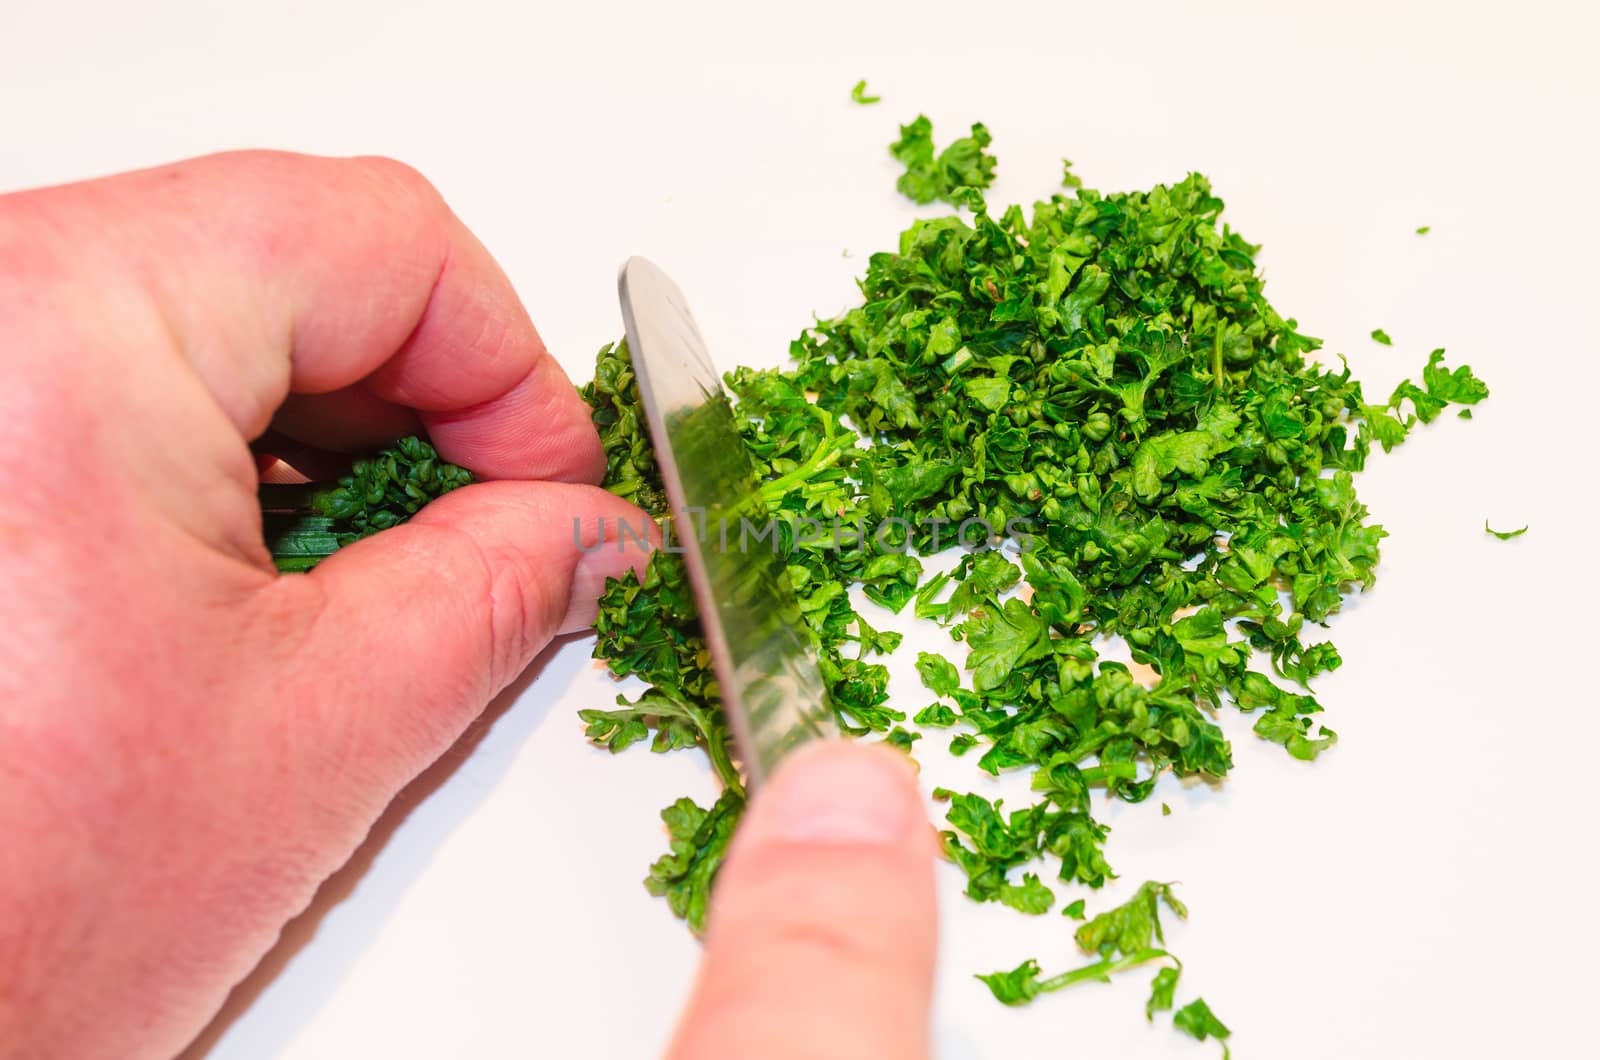 Chopping parsley by JFsPic